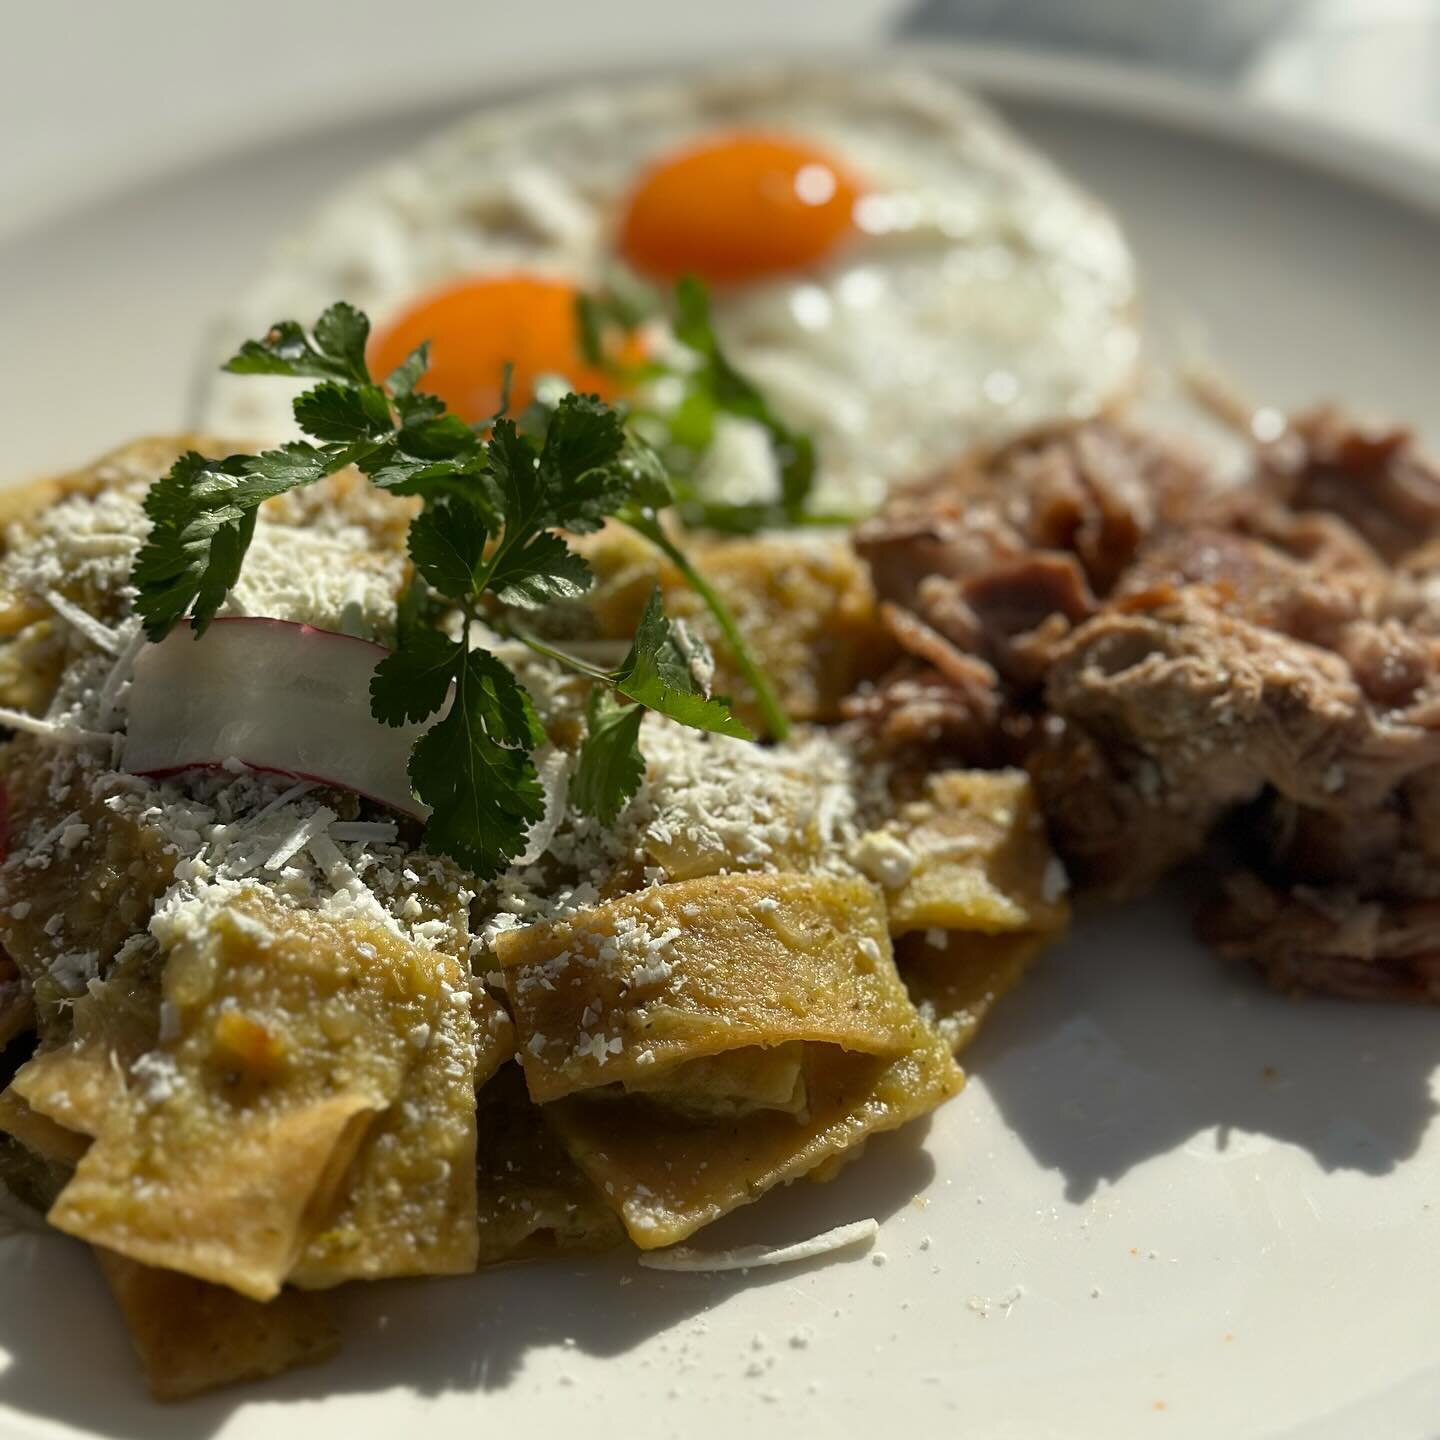 New on the brunch menu! Chef Salomon&rsquo;s chilaquiles. Do you prefer green, red or divorciados? We have all the options!